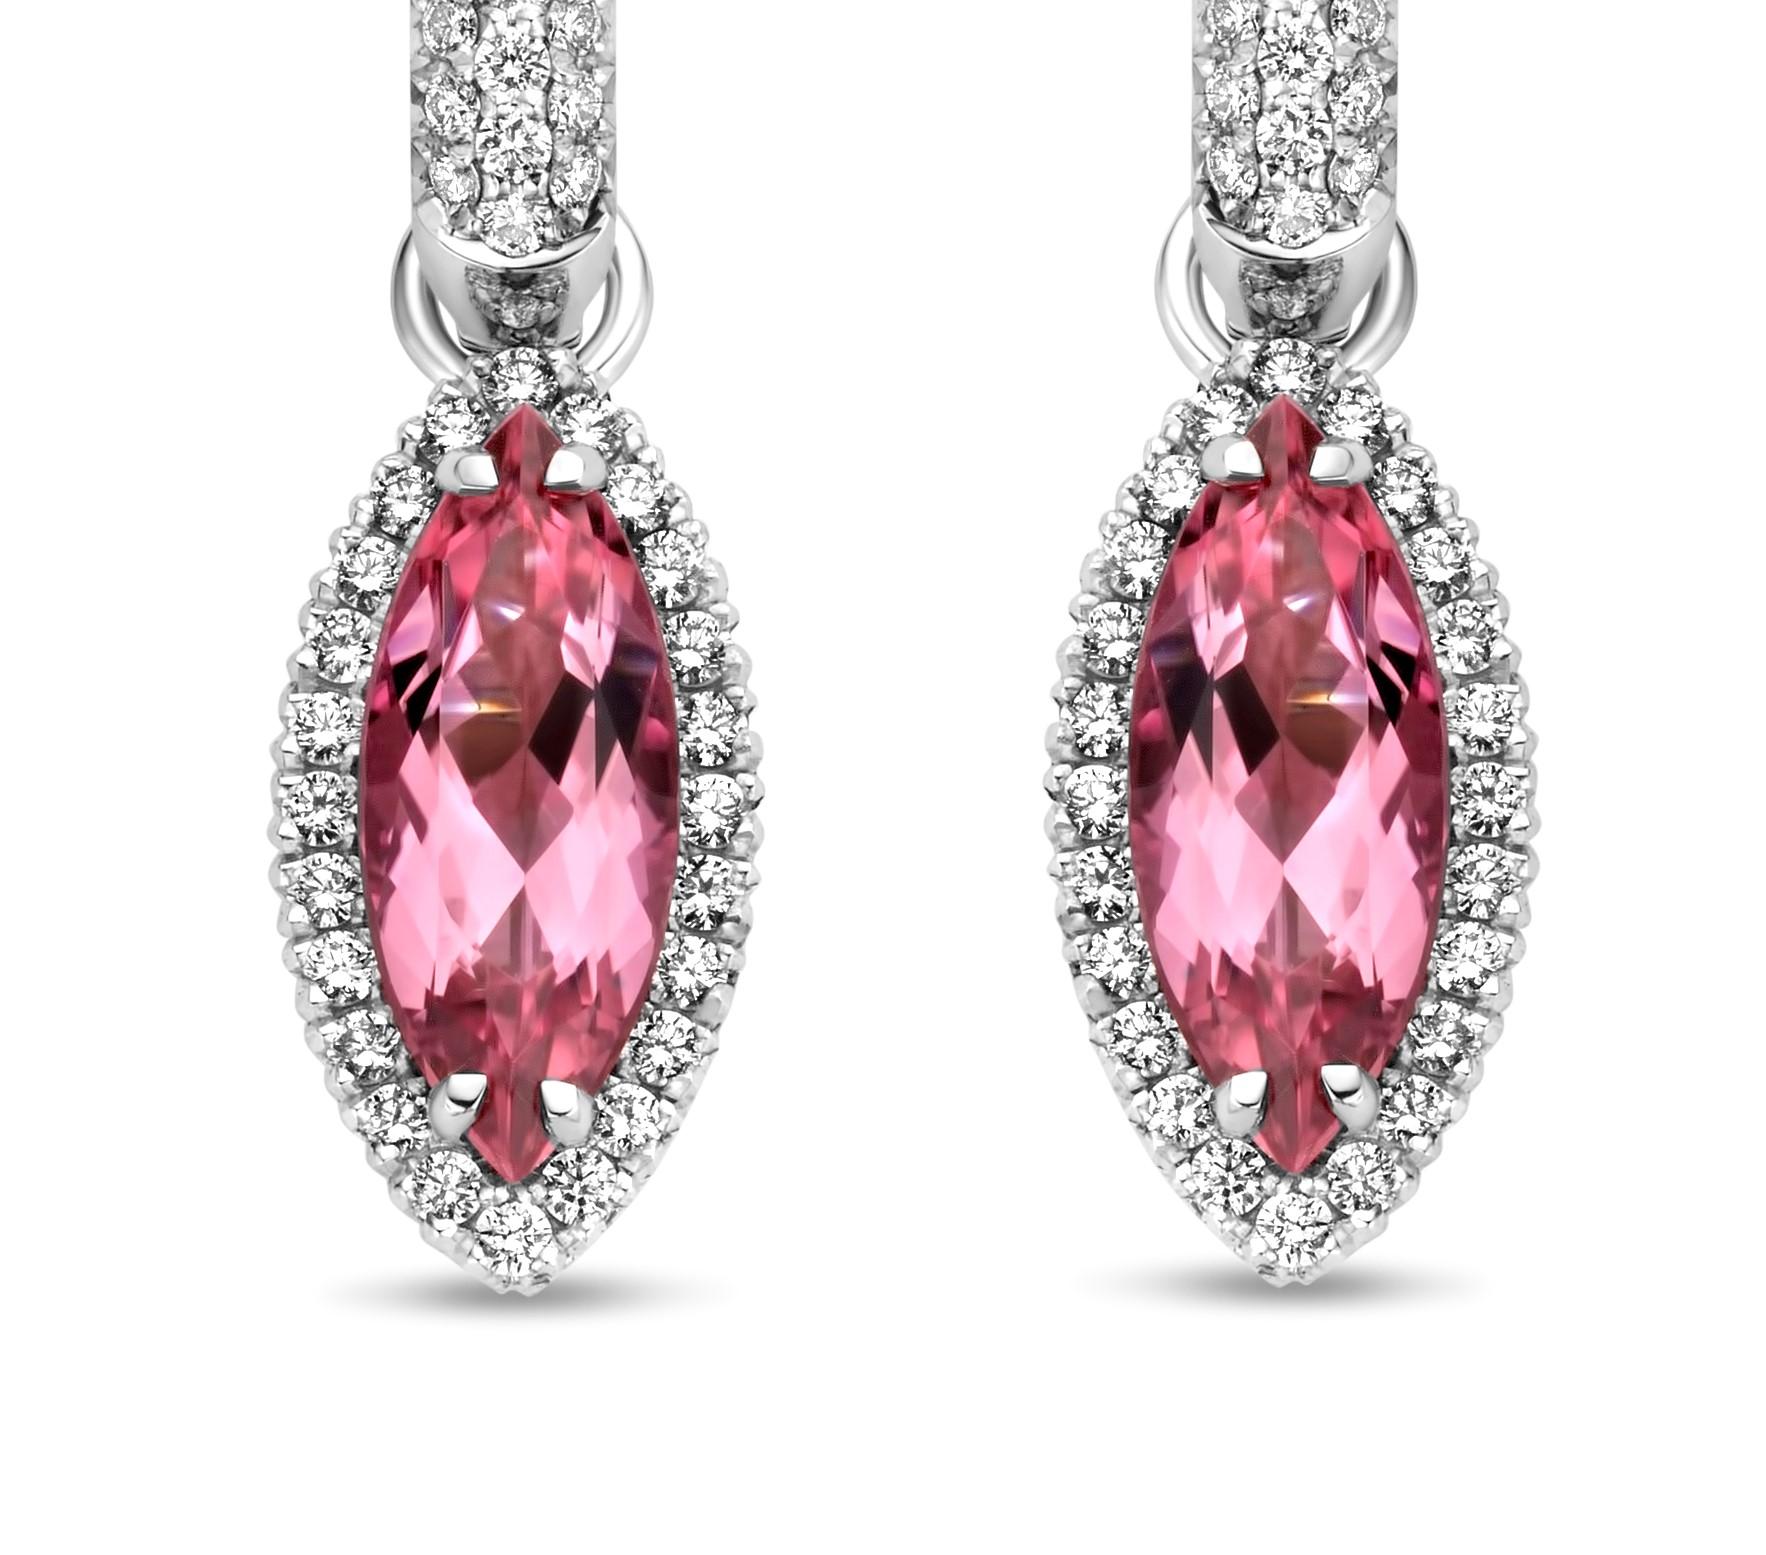 One of a kind “Aïda” attachable earrings in 18K white gold 11,6g set with 2 natural, eye clean, rose tourmalines in marquise cut 4,33Ct, pink sapphires 0,76Ct and diamonds 1,18Ct (VS-F quality).

Because every tourmaline has his own color, every